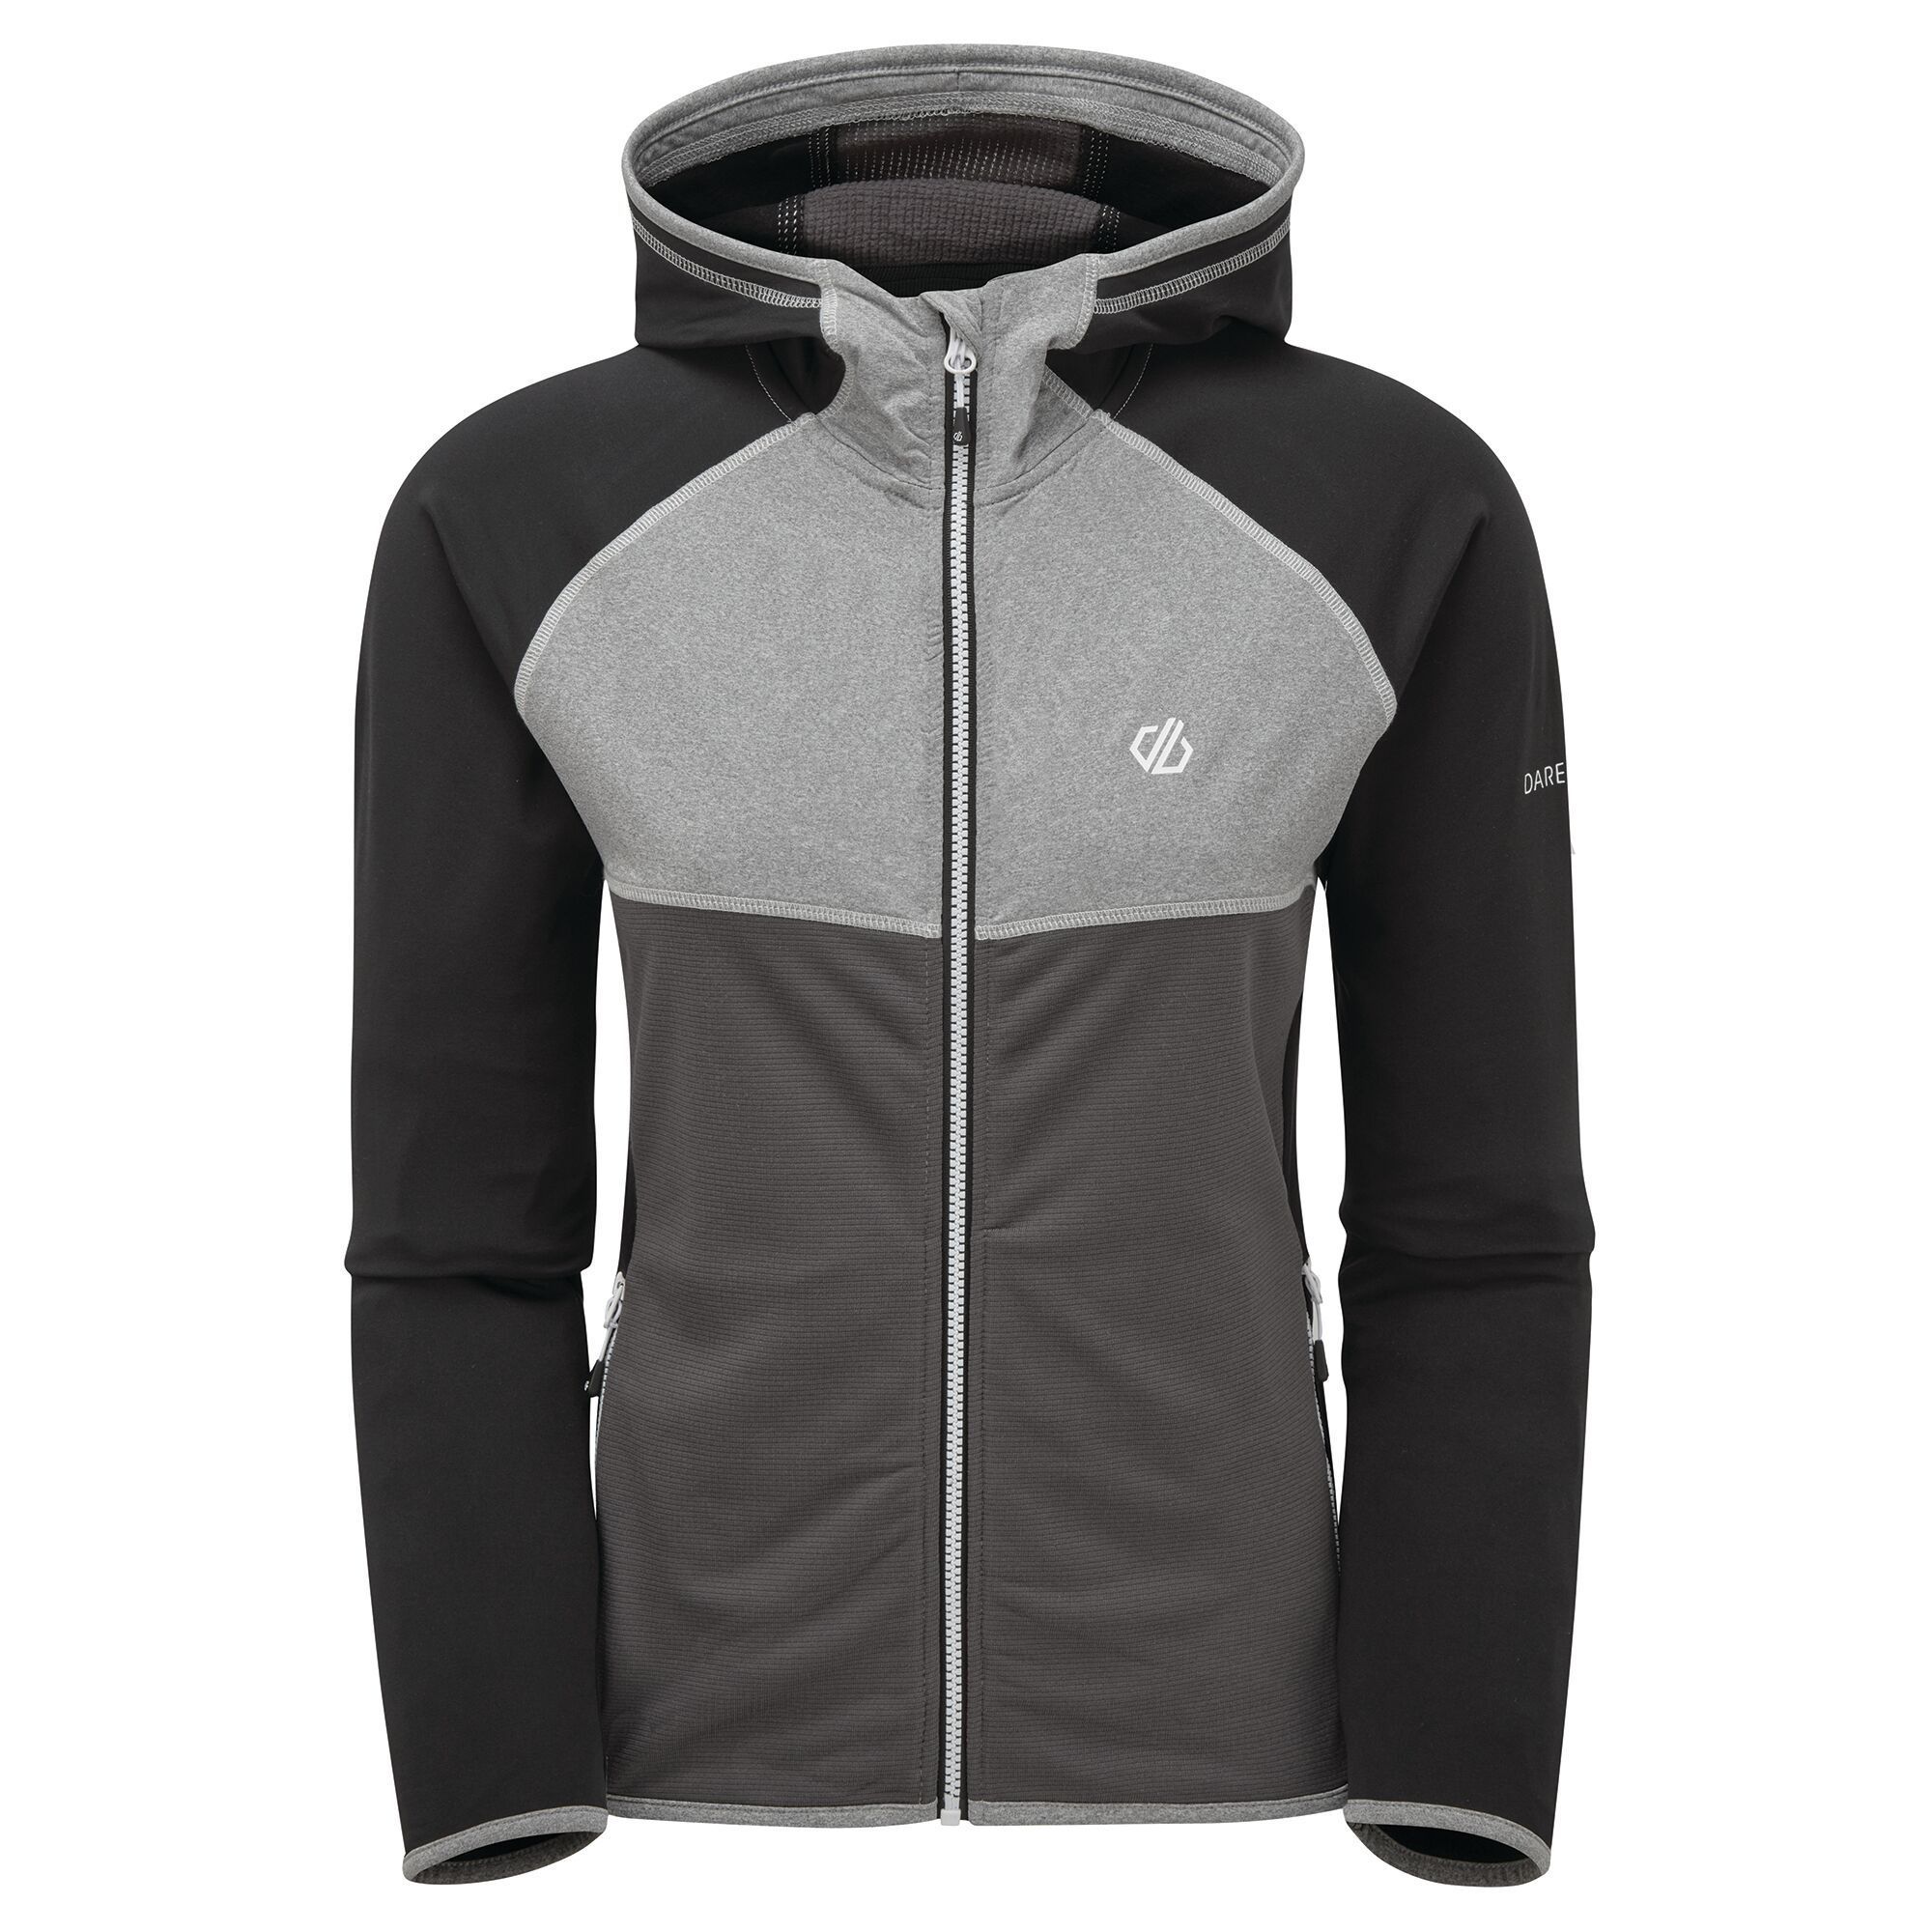 Material: 100% Polyester. Lightweight, stretch fabric hooded sweatshirt with full length zip. Stretch binding to hood opening, cuffs and hem. Inner zip and chin guard. 2 lower zip pockets.